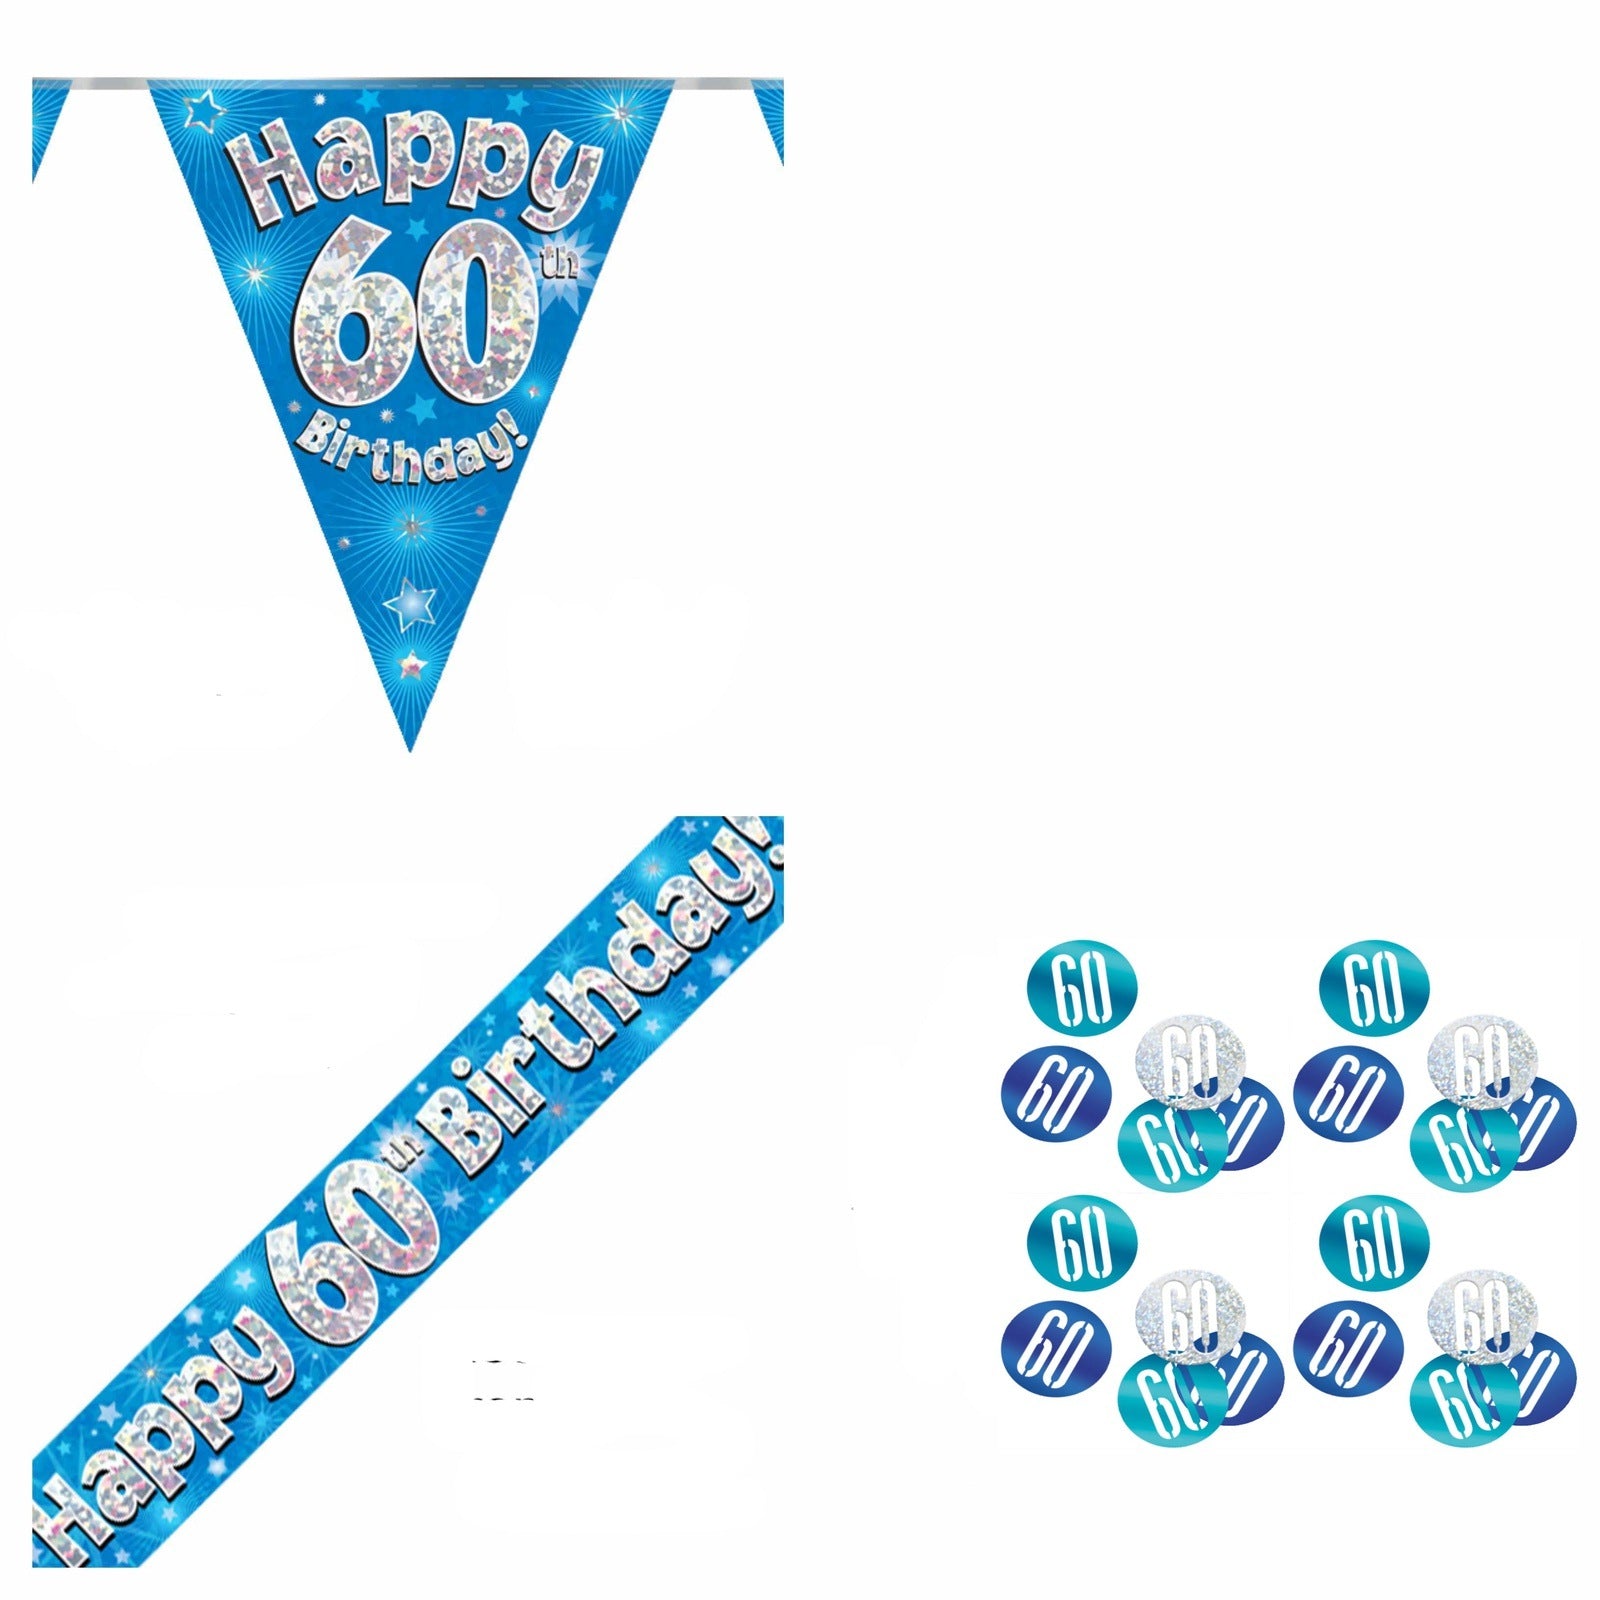 Blue Stars Bundle A Banner, Bunting, Confetti Ages 1 to 90